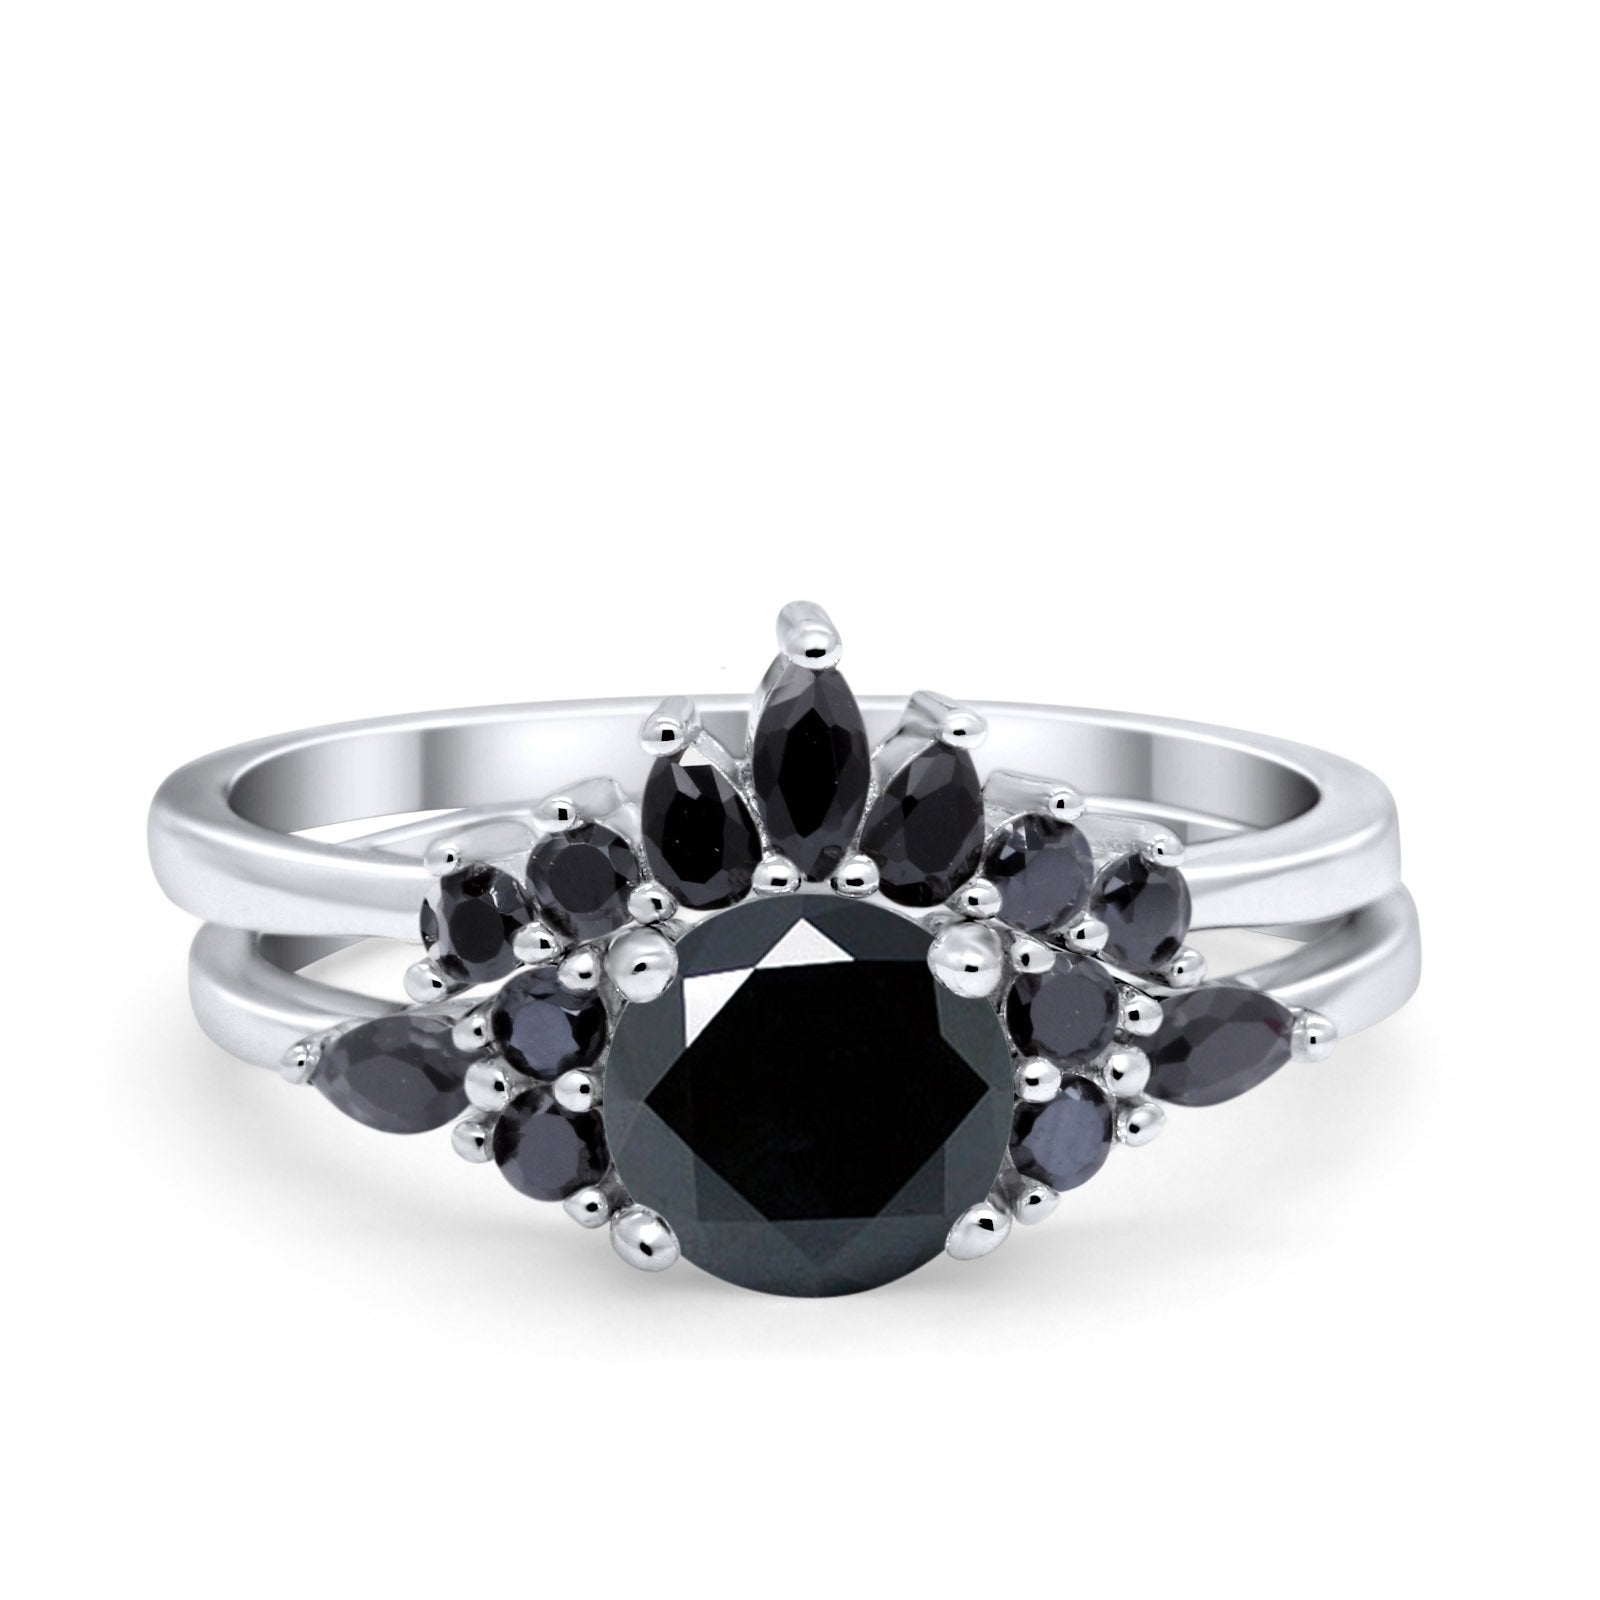 Two Piece Art Deco Wedding Vintage Black Marquise Round Simulated Cubic Zirconia 925 Sterling Silver